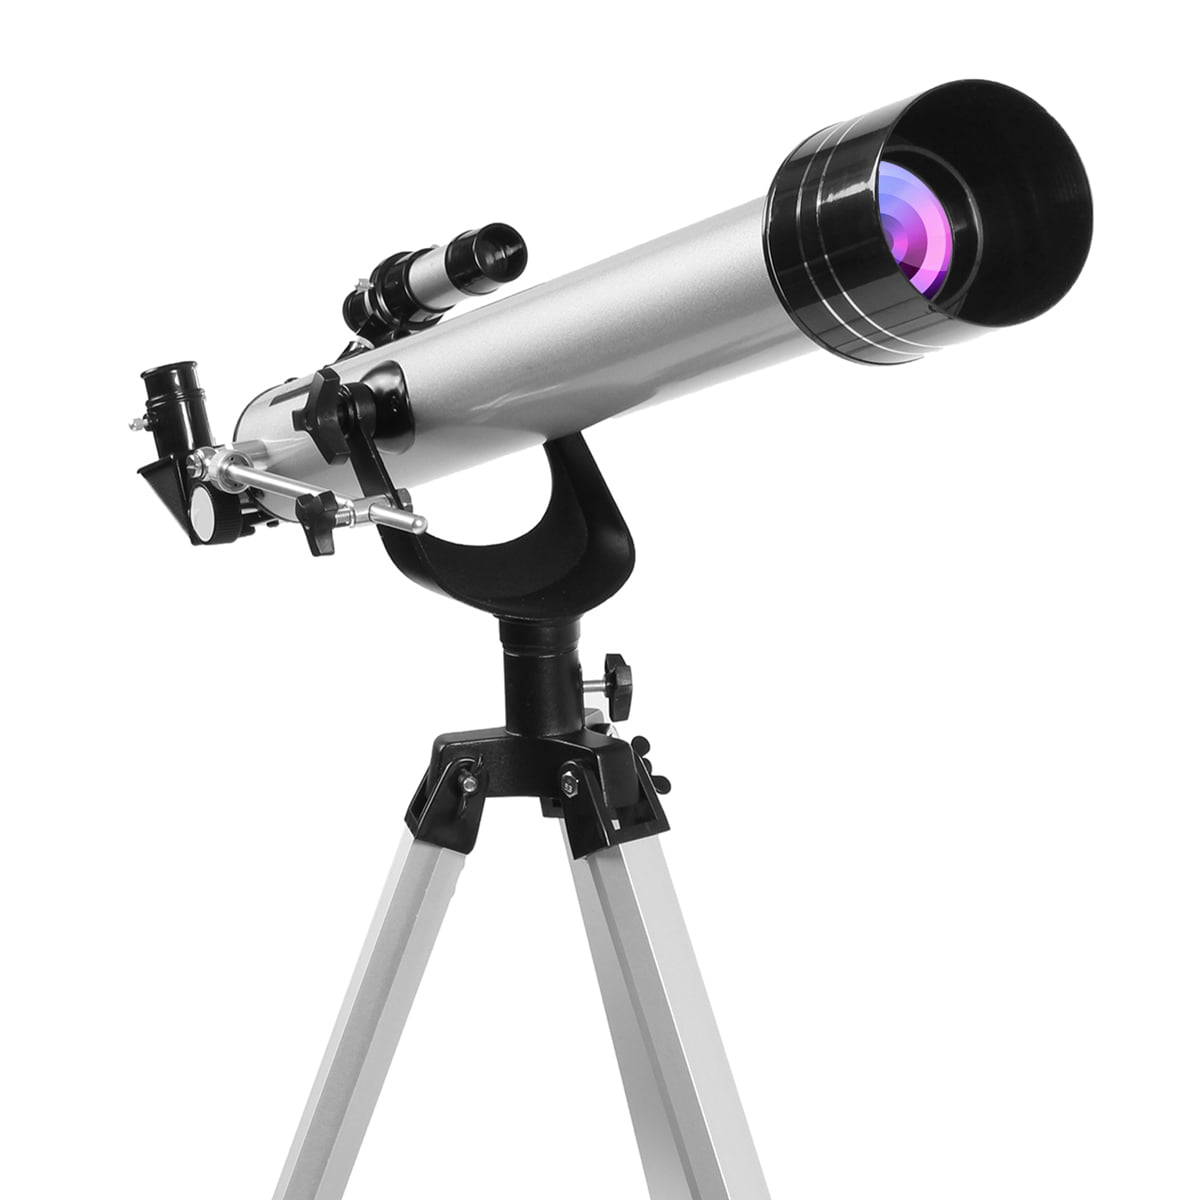 Portable Refractor Telescope with Tripod & Finder Scope Travel Scope with 3 Magnification Eyepieces & Moon Mirror HomGarden 70mm Telescope for Kids and Astronomy Beginners 